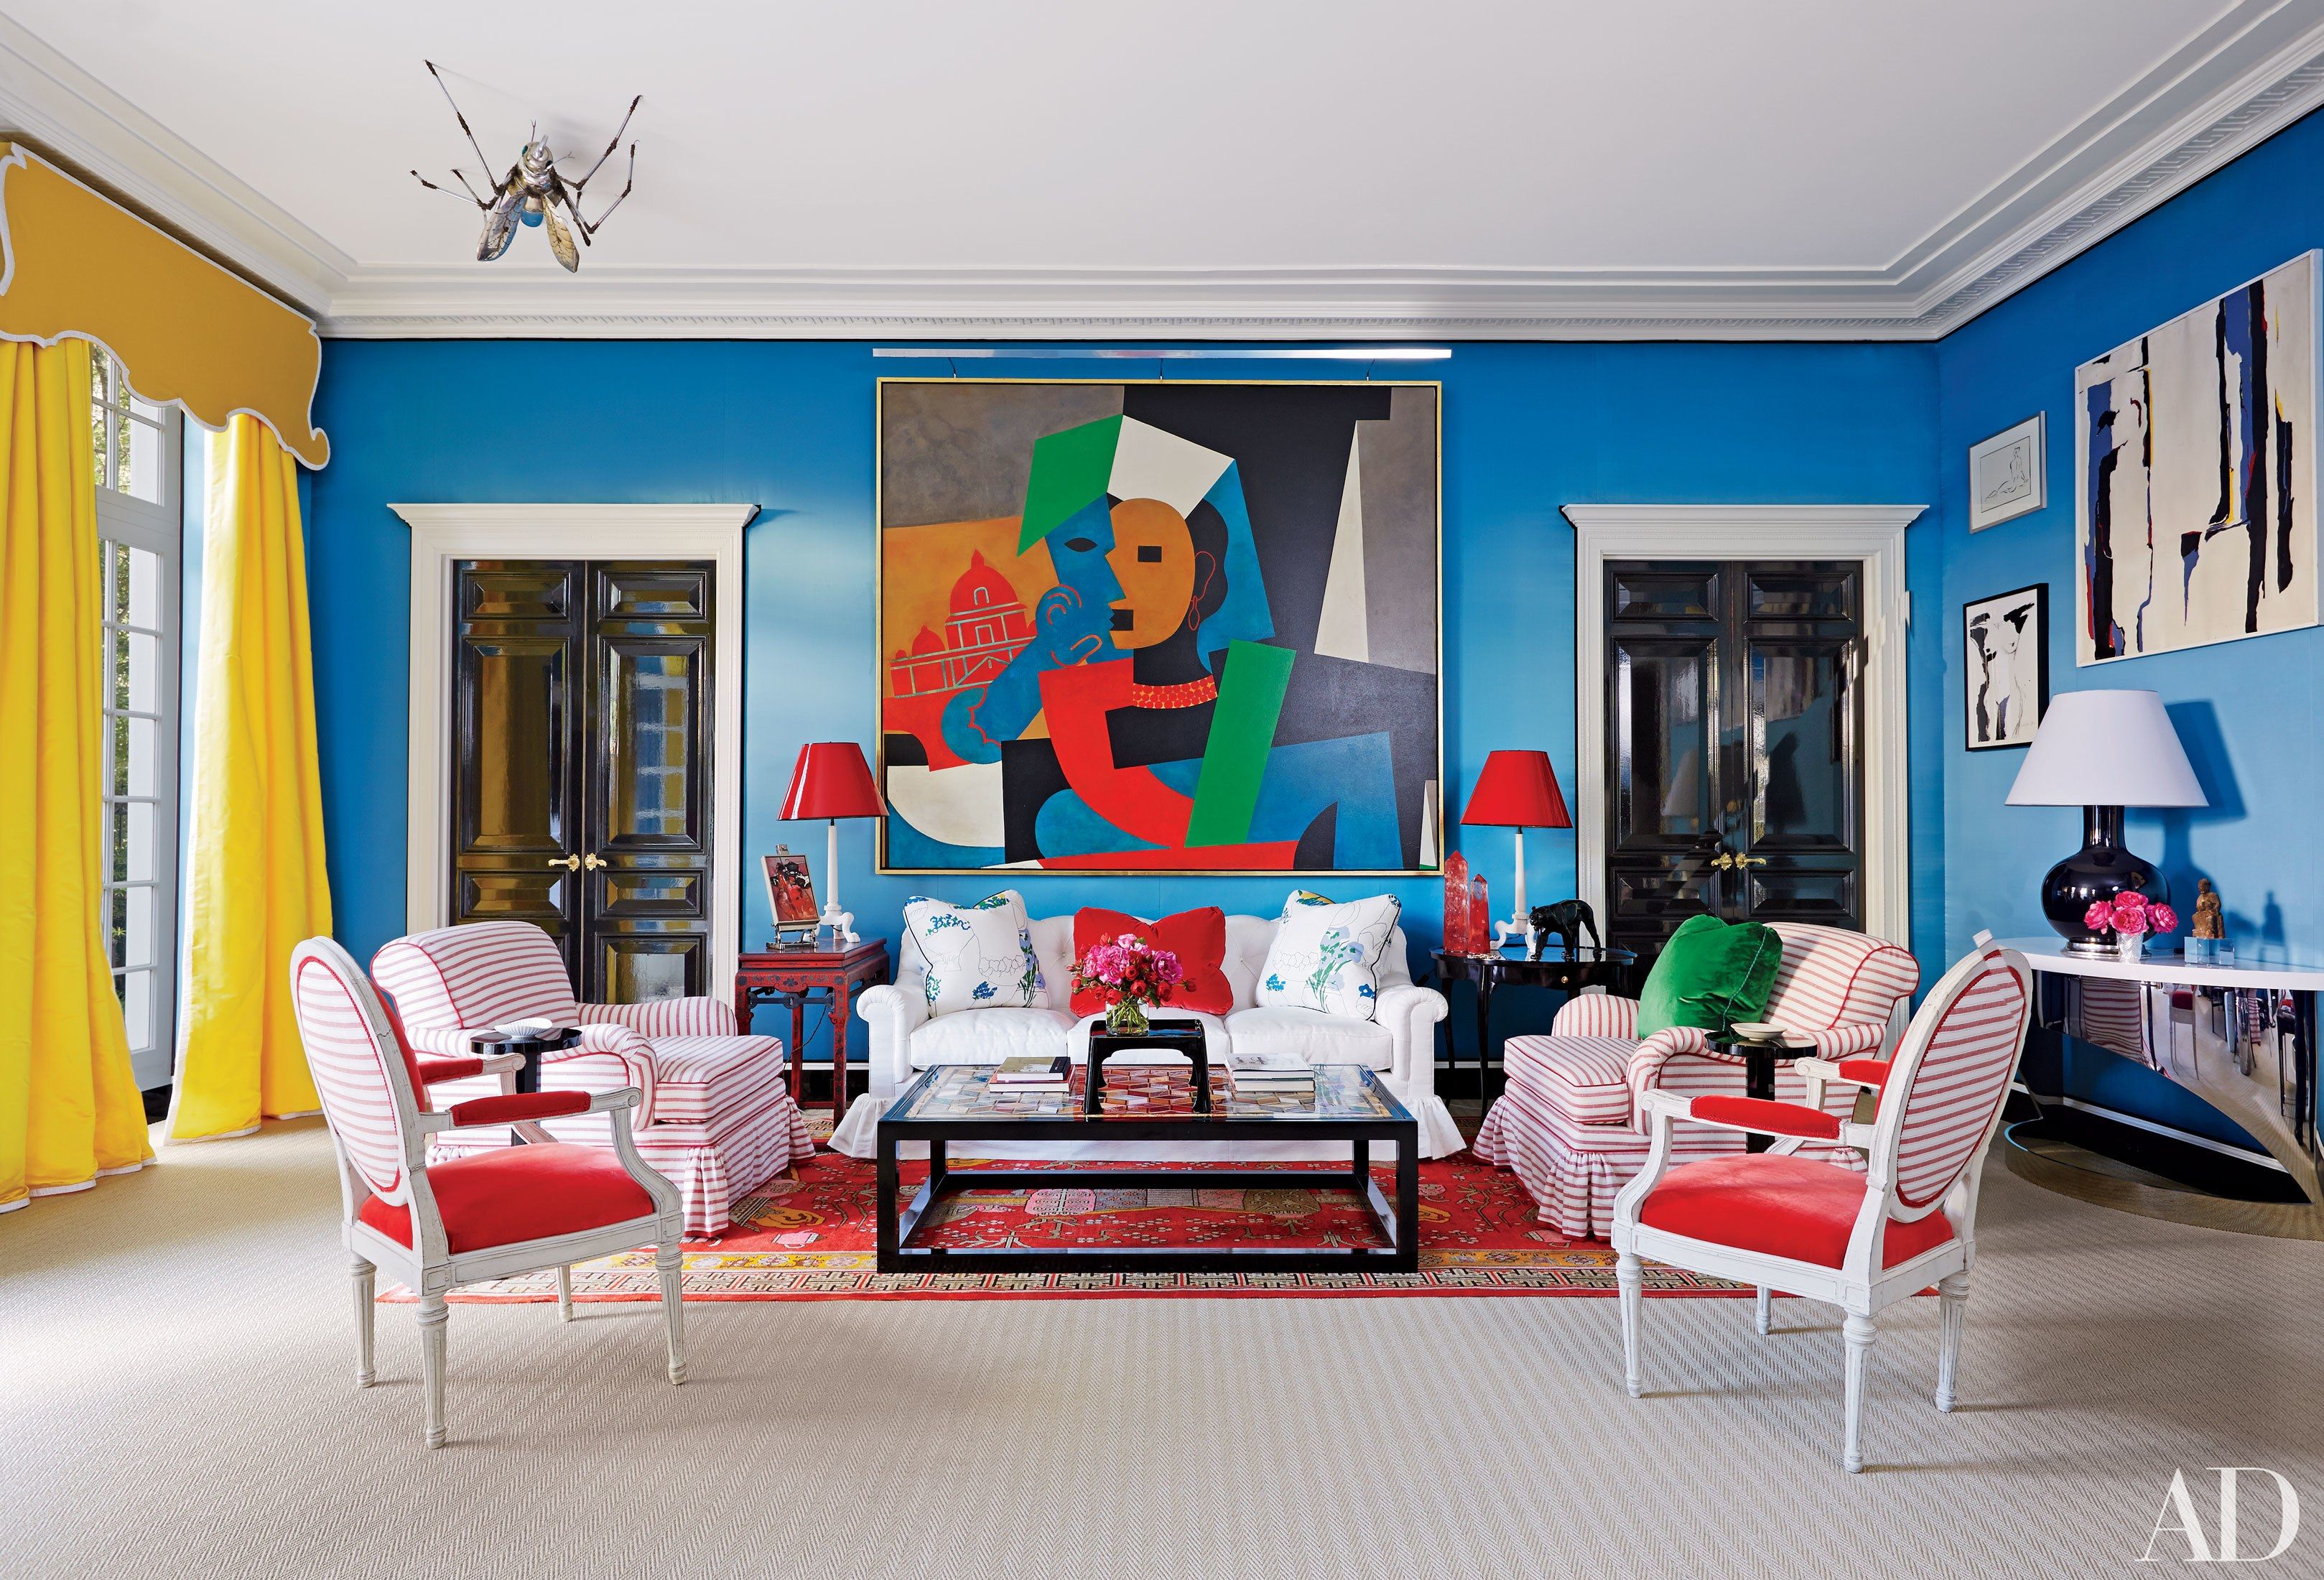 25 Colorful Rooms from the AD Archives | Architectural digest, Room ...